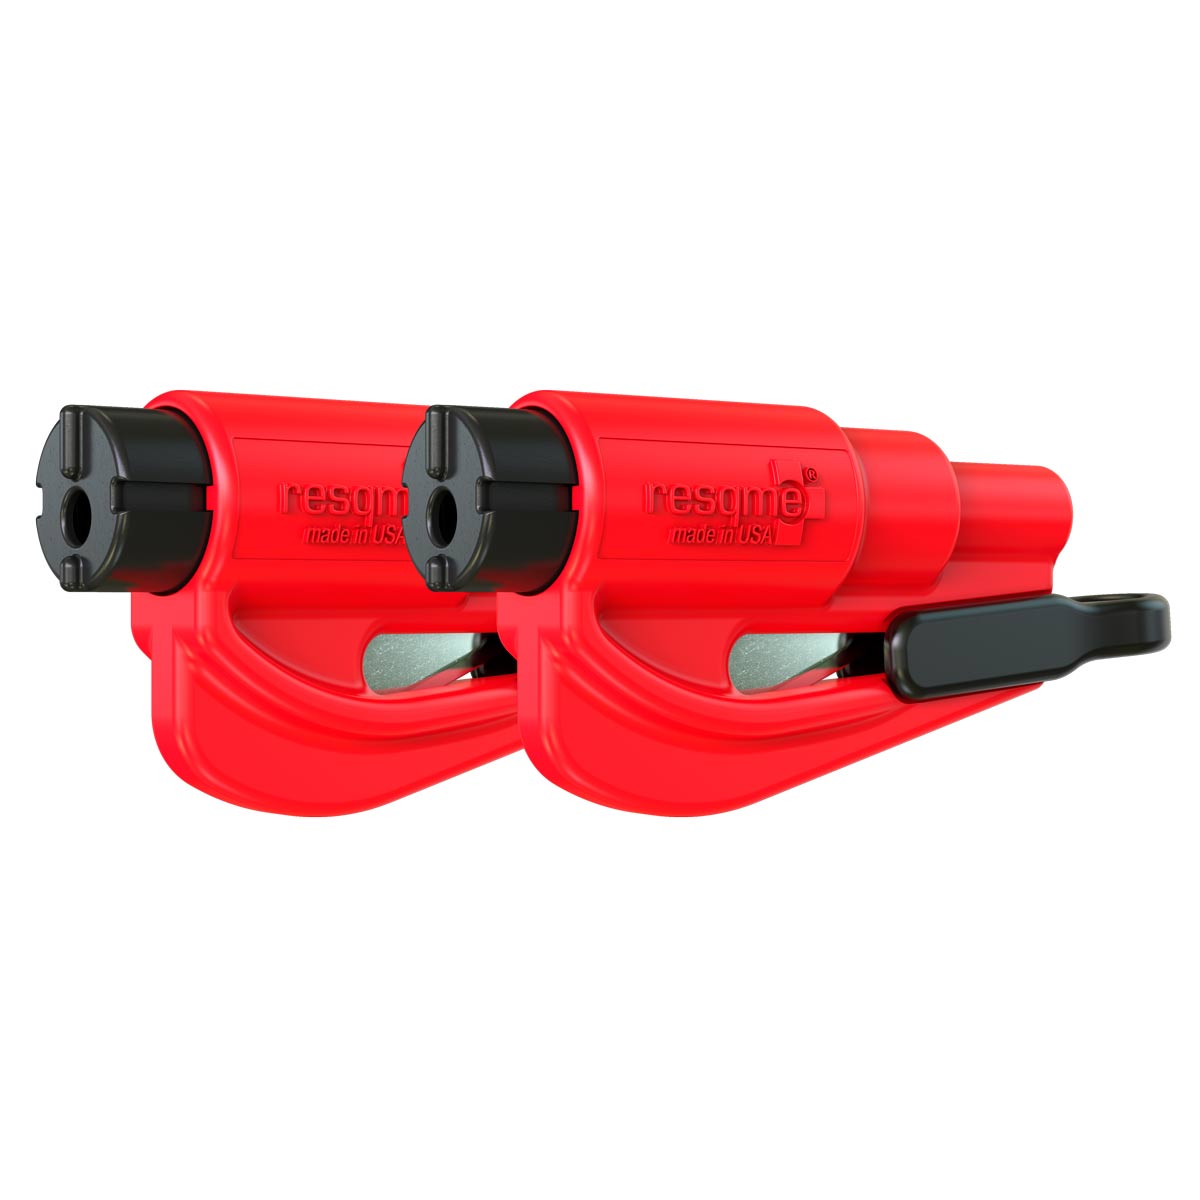 Resqme Pack of 2, The Original Emergency Keychain Car Escape Tool, 2-in-1 Seatbelt Cutter and Window Breaker, Reliable Compact Emergency Hammer, Red - image 1 of 12